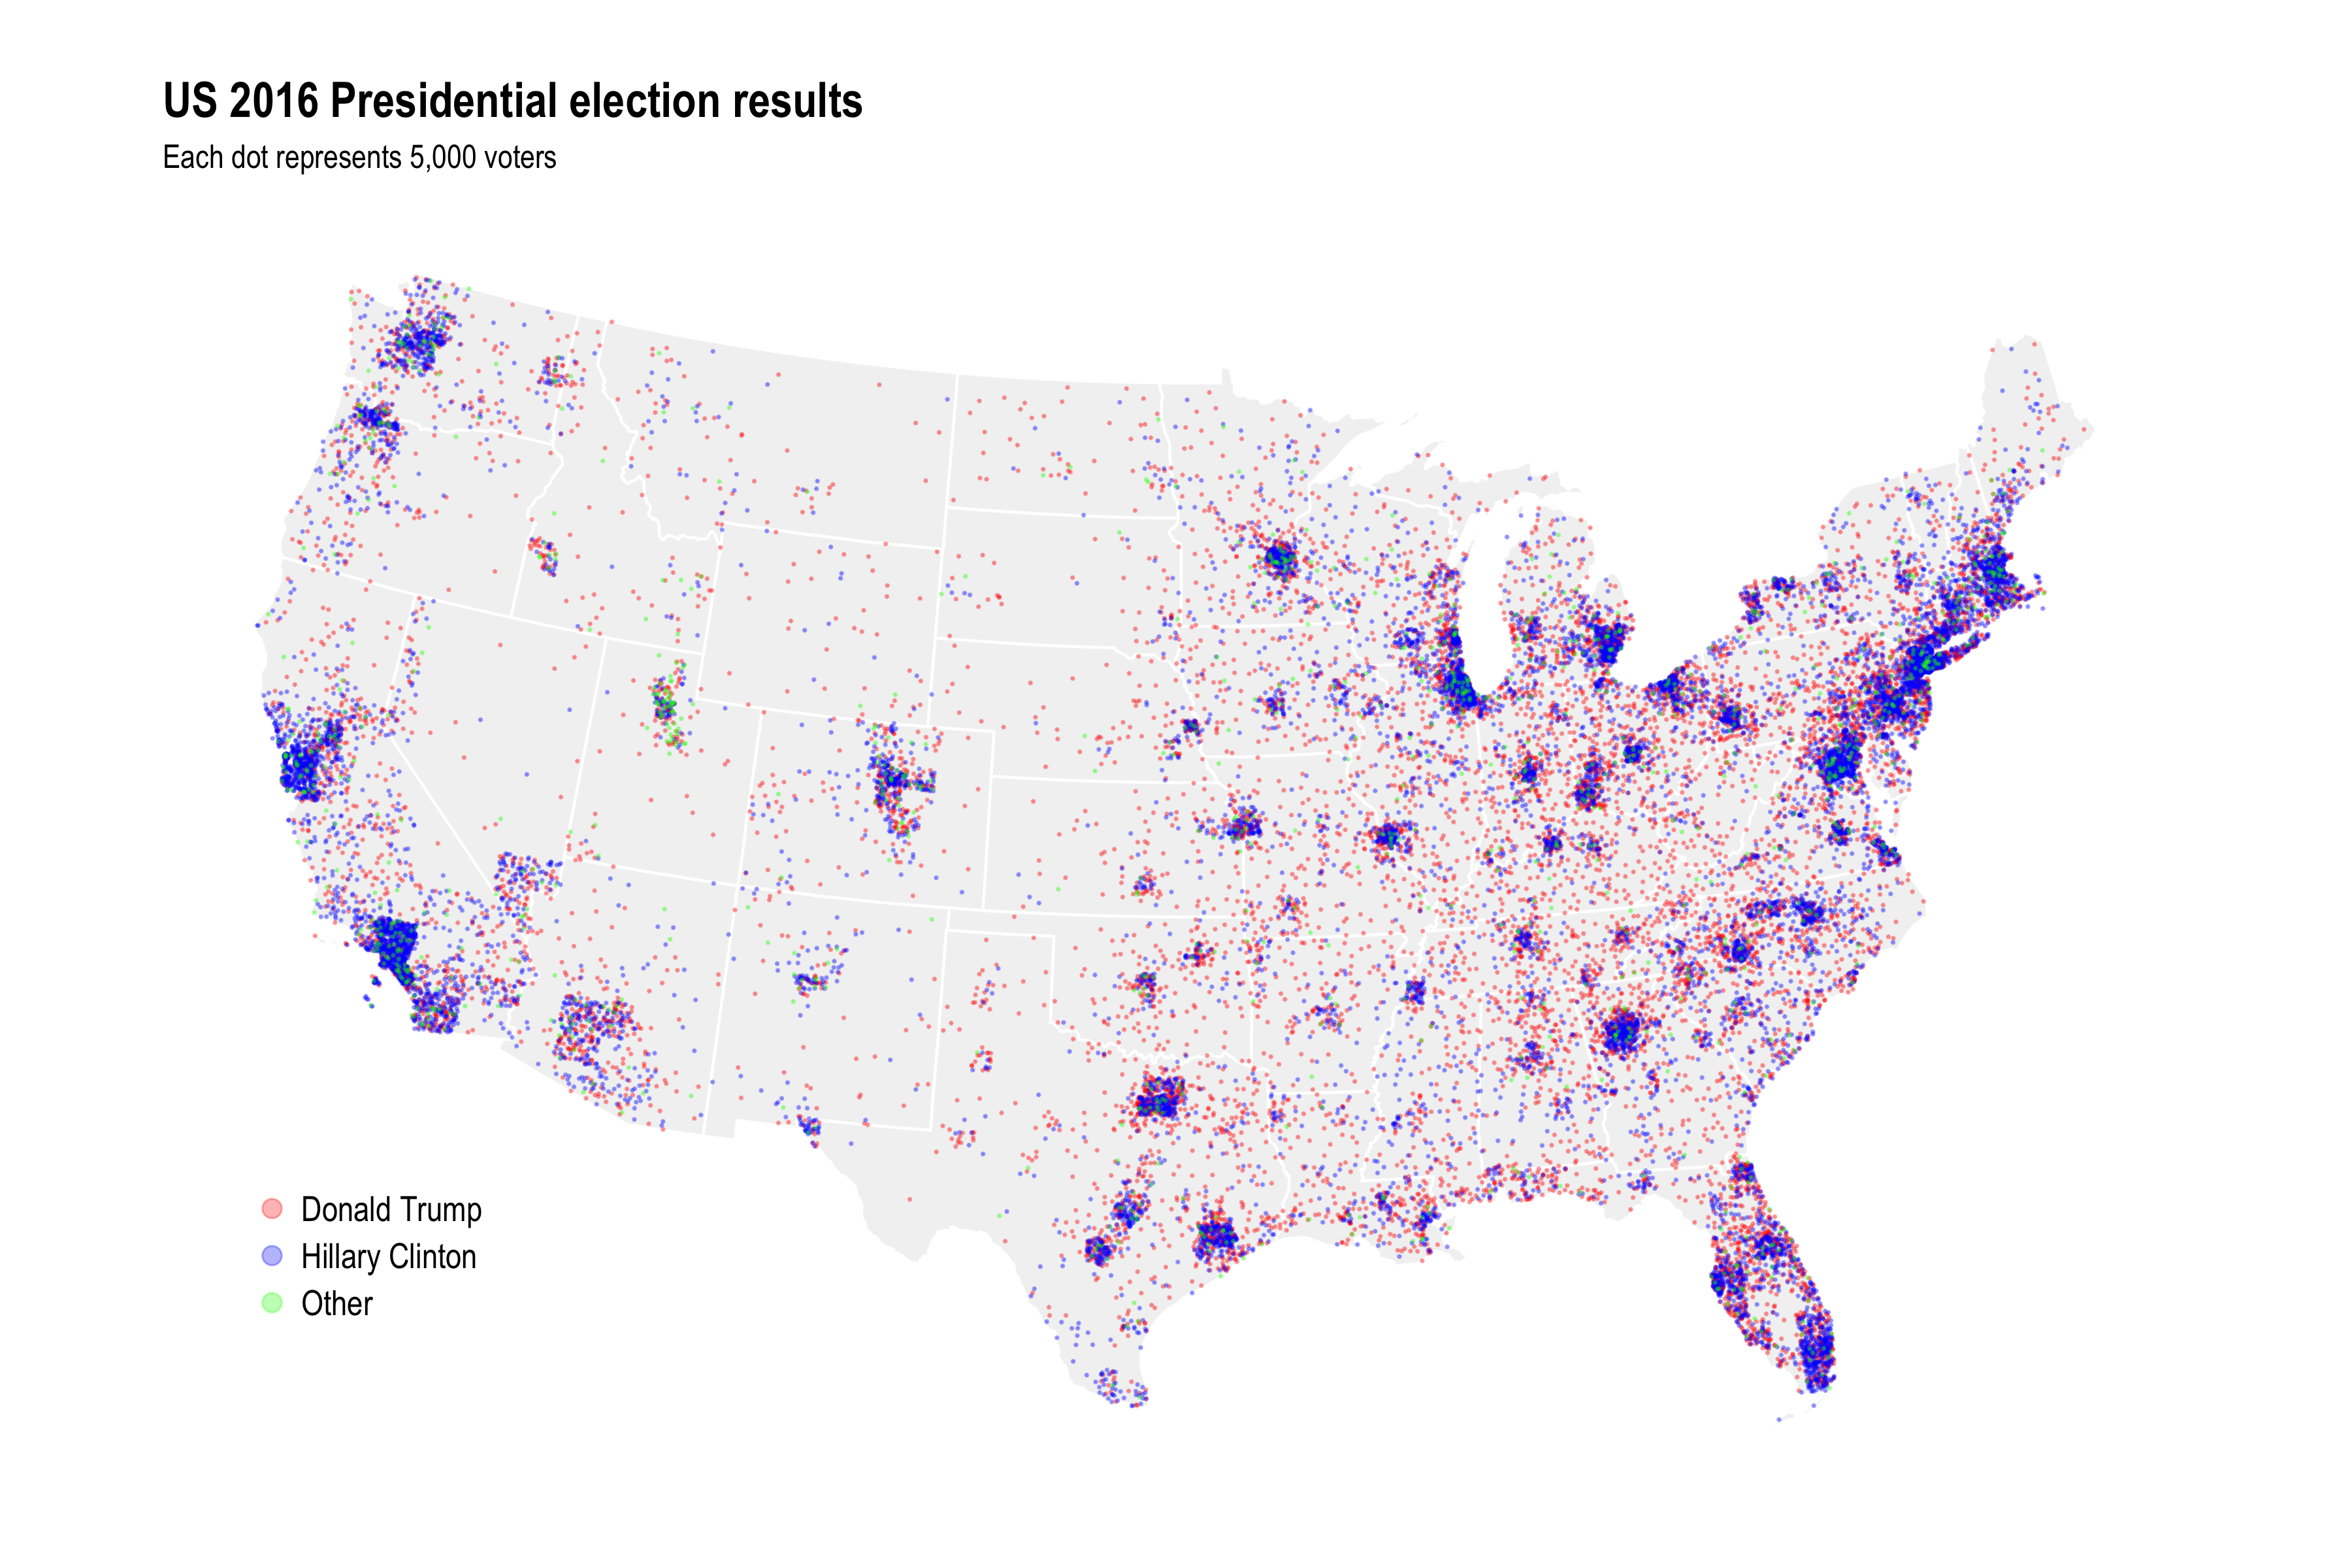 Dot density map of the 2016 presidential election results